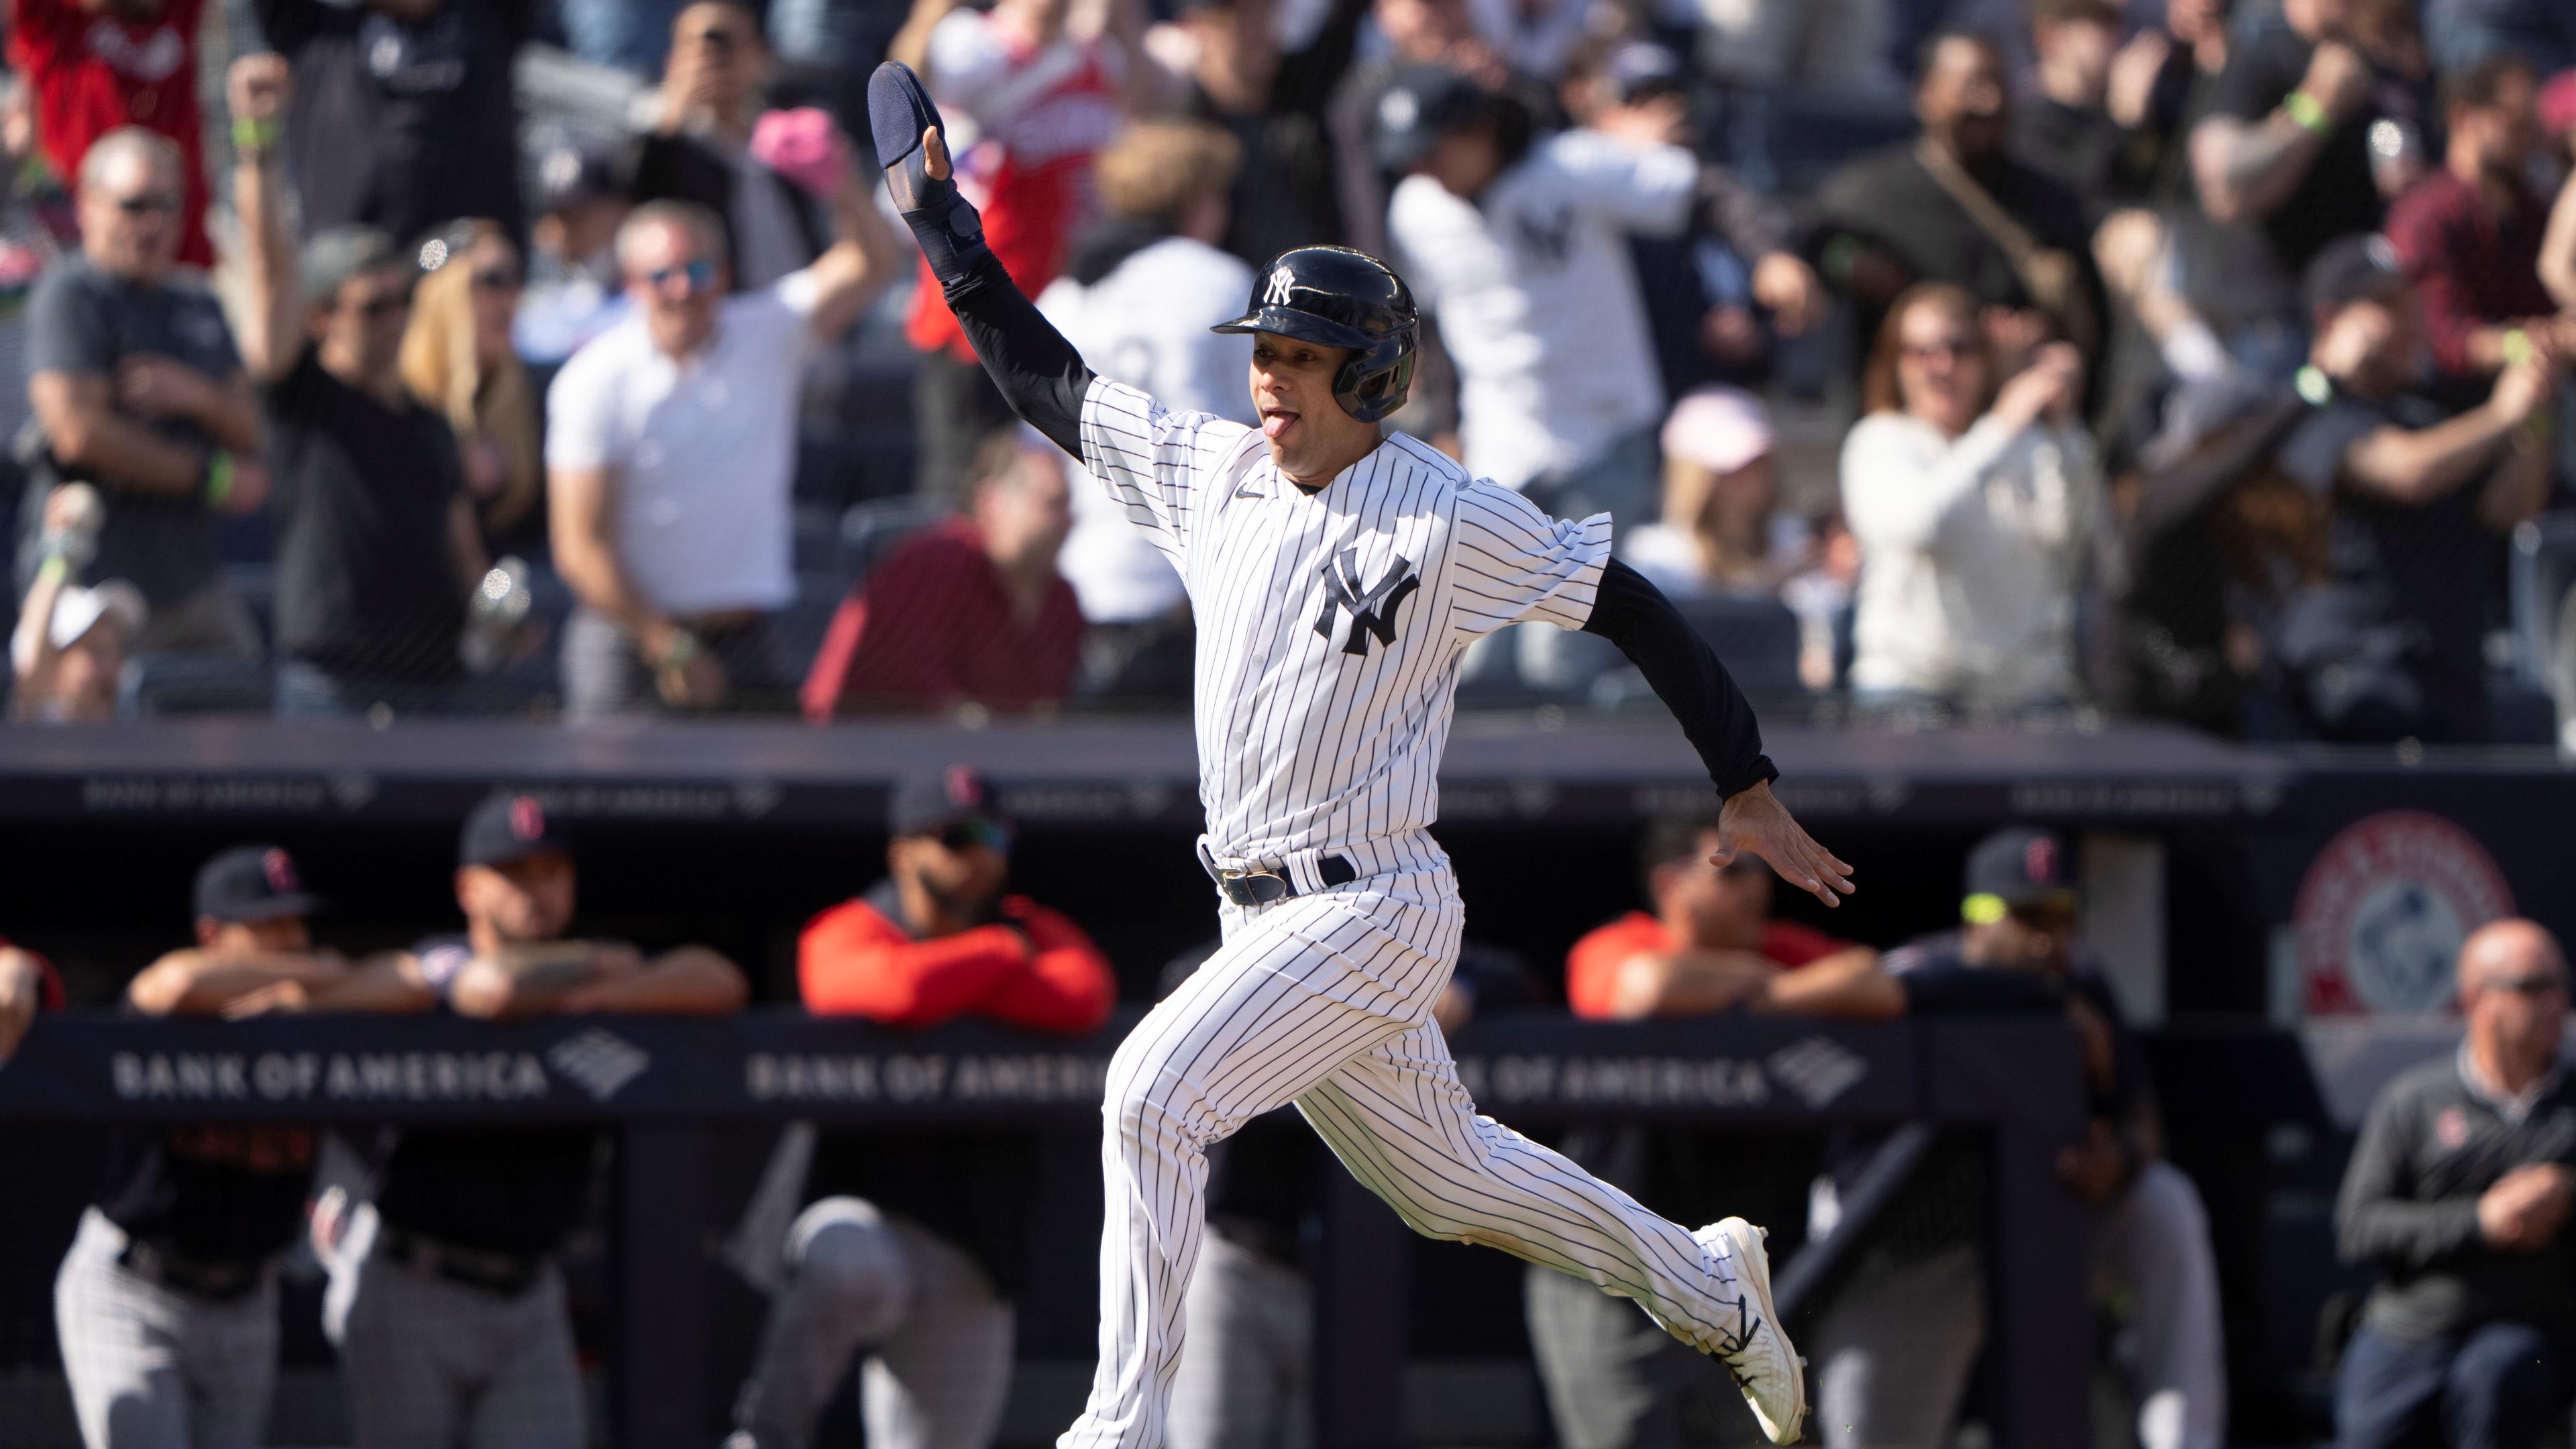 New York Yankees shortstop Isiah Kiner-Falefa (12) reacts to scoring the winning run on New York Yankees second baseman Gleyber Torres (25) (not pictured) RBI single during the ninth inning / Gregory Fisher-USA TODAY Sports